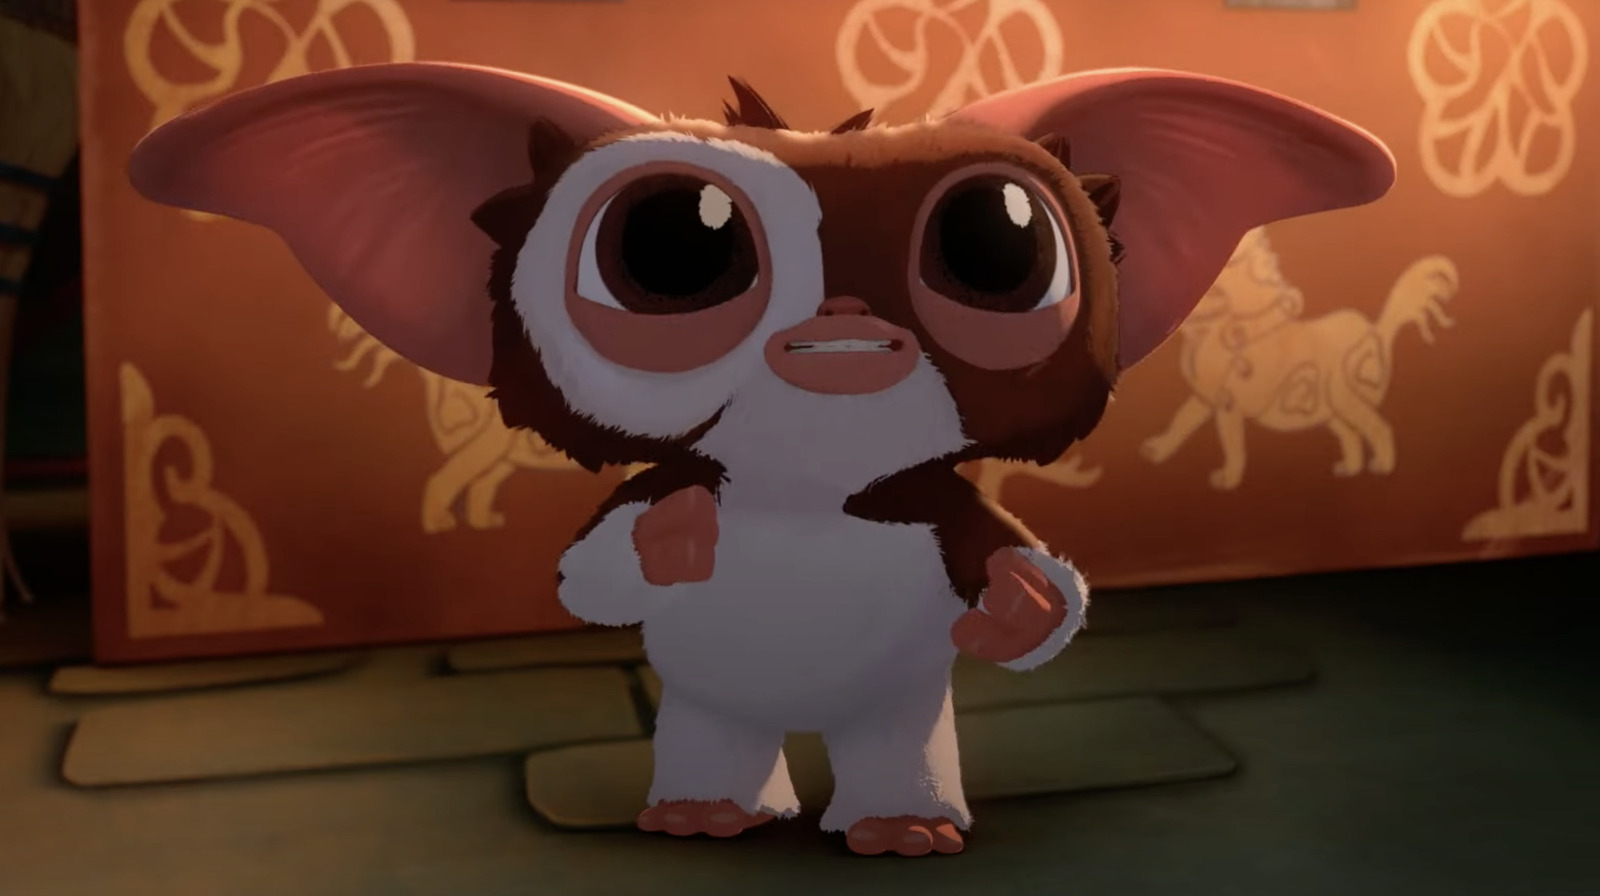 Gremlins Secrets Of The Mogwai Trailer The Classic Film Series Is Now Animated On Max